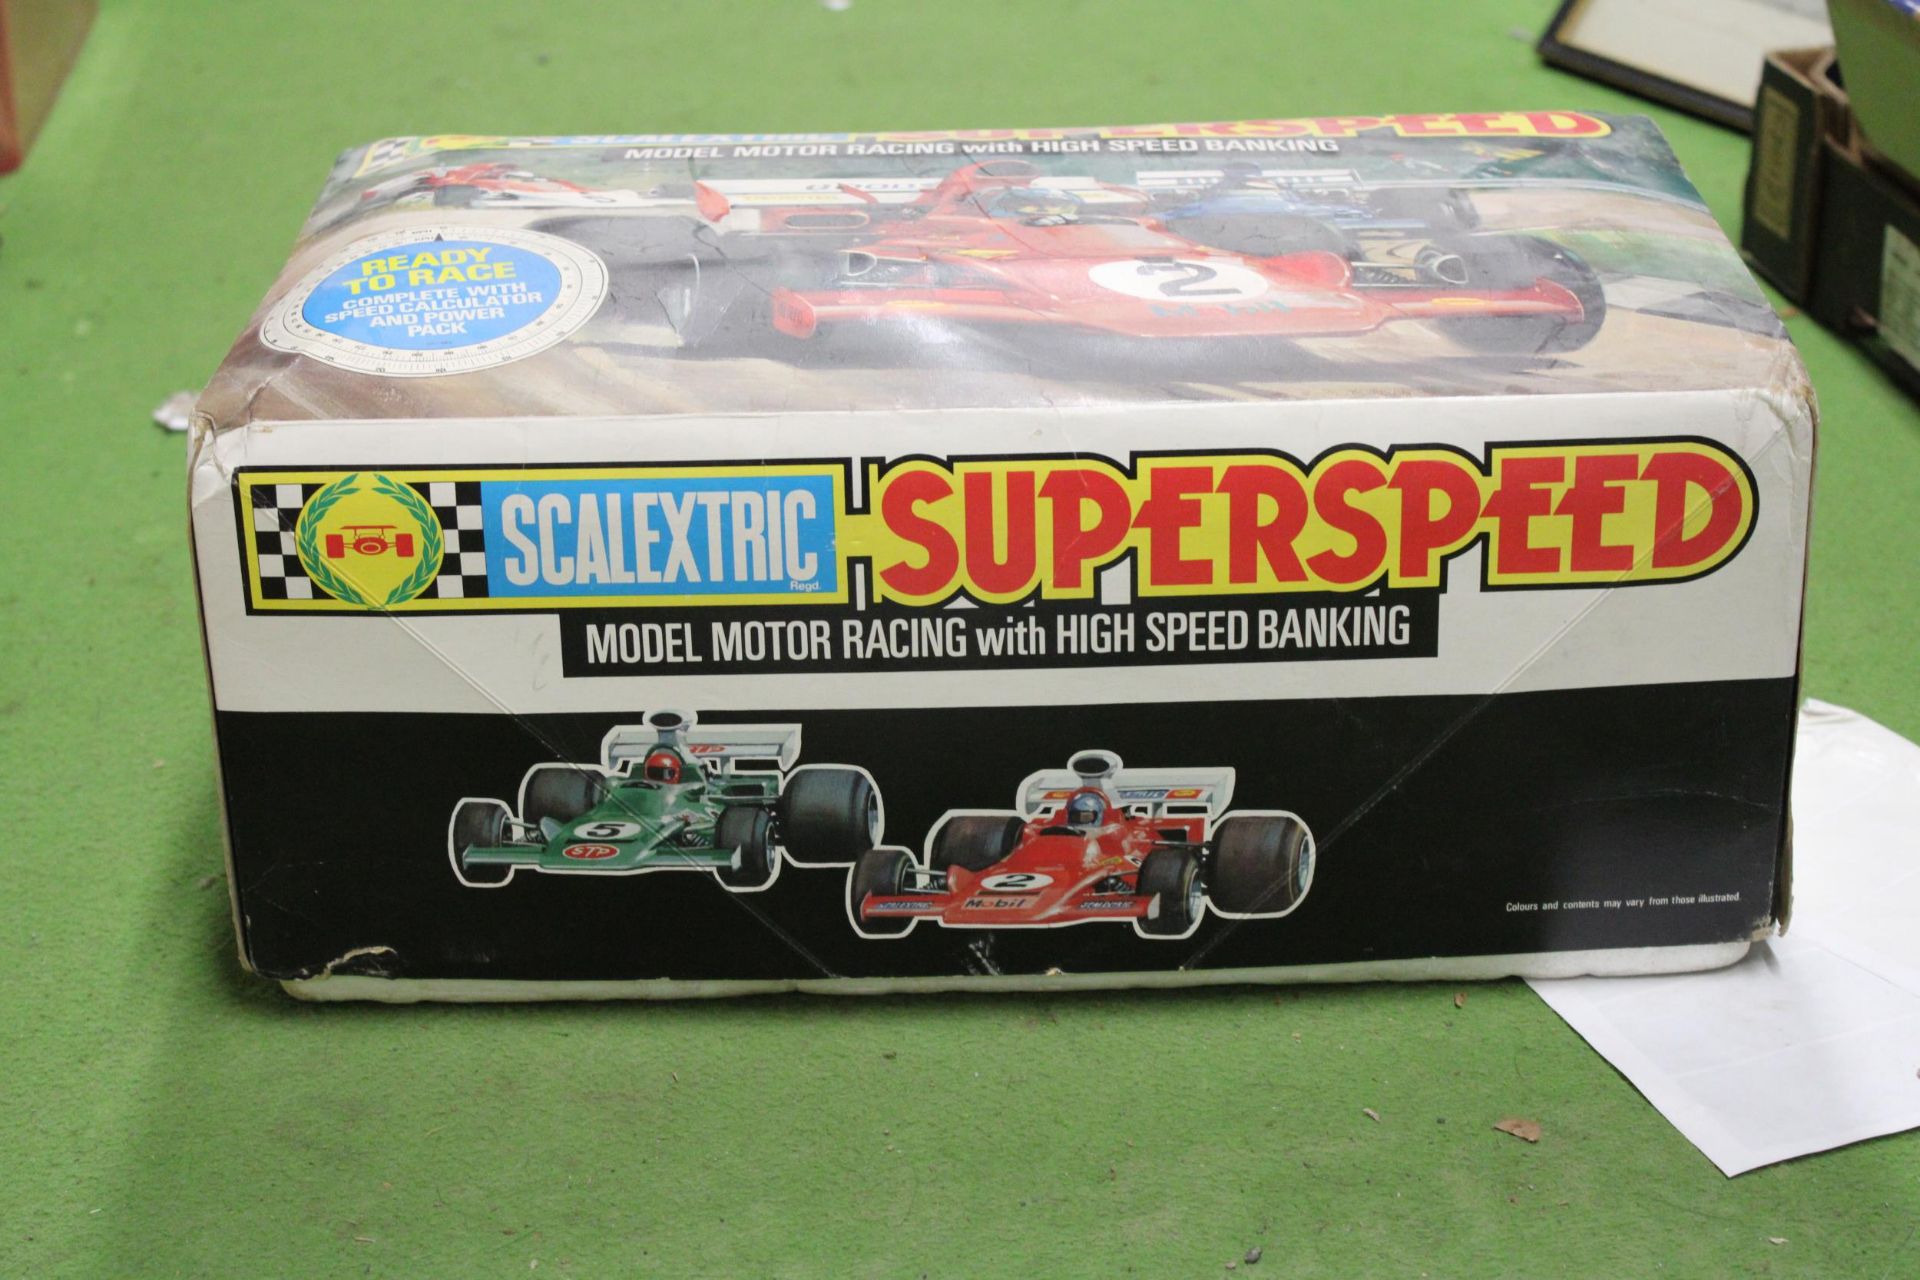 A BOXED SCALEXTRIC SUPERSPEED MODEL MOTOR RACING SET - Bild 4 aus 5